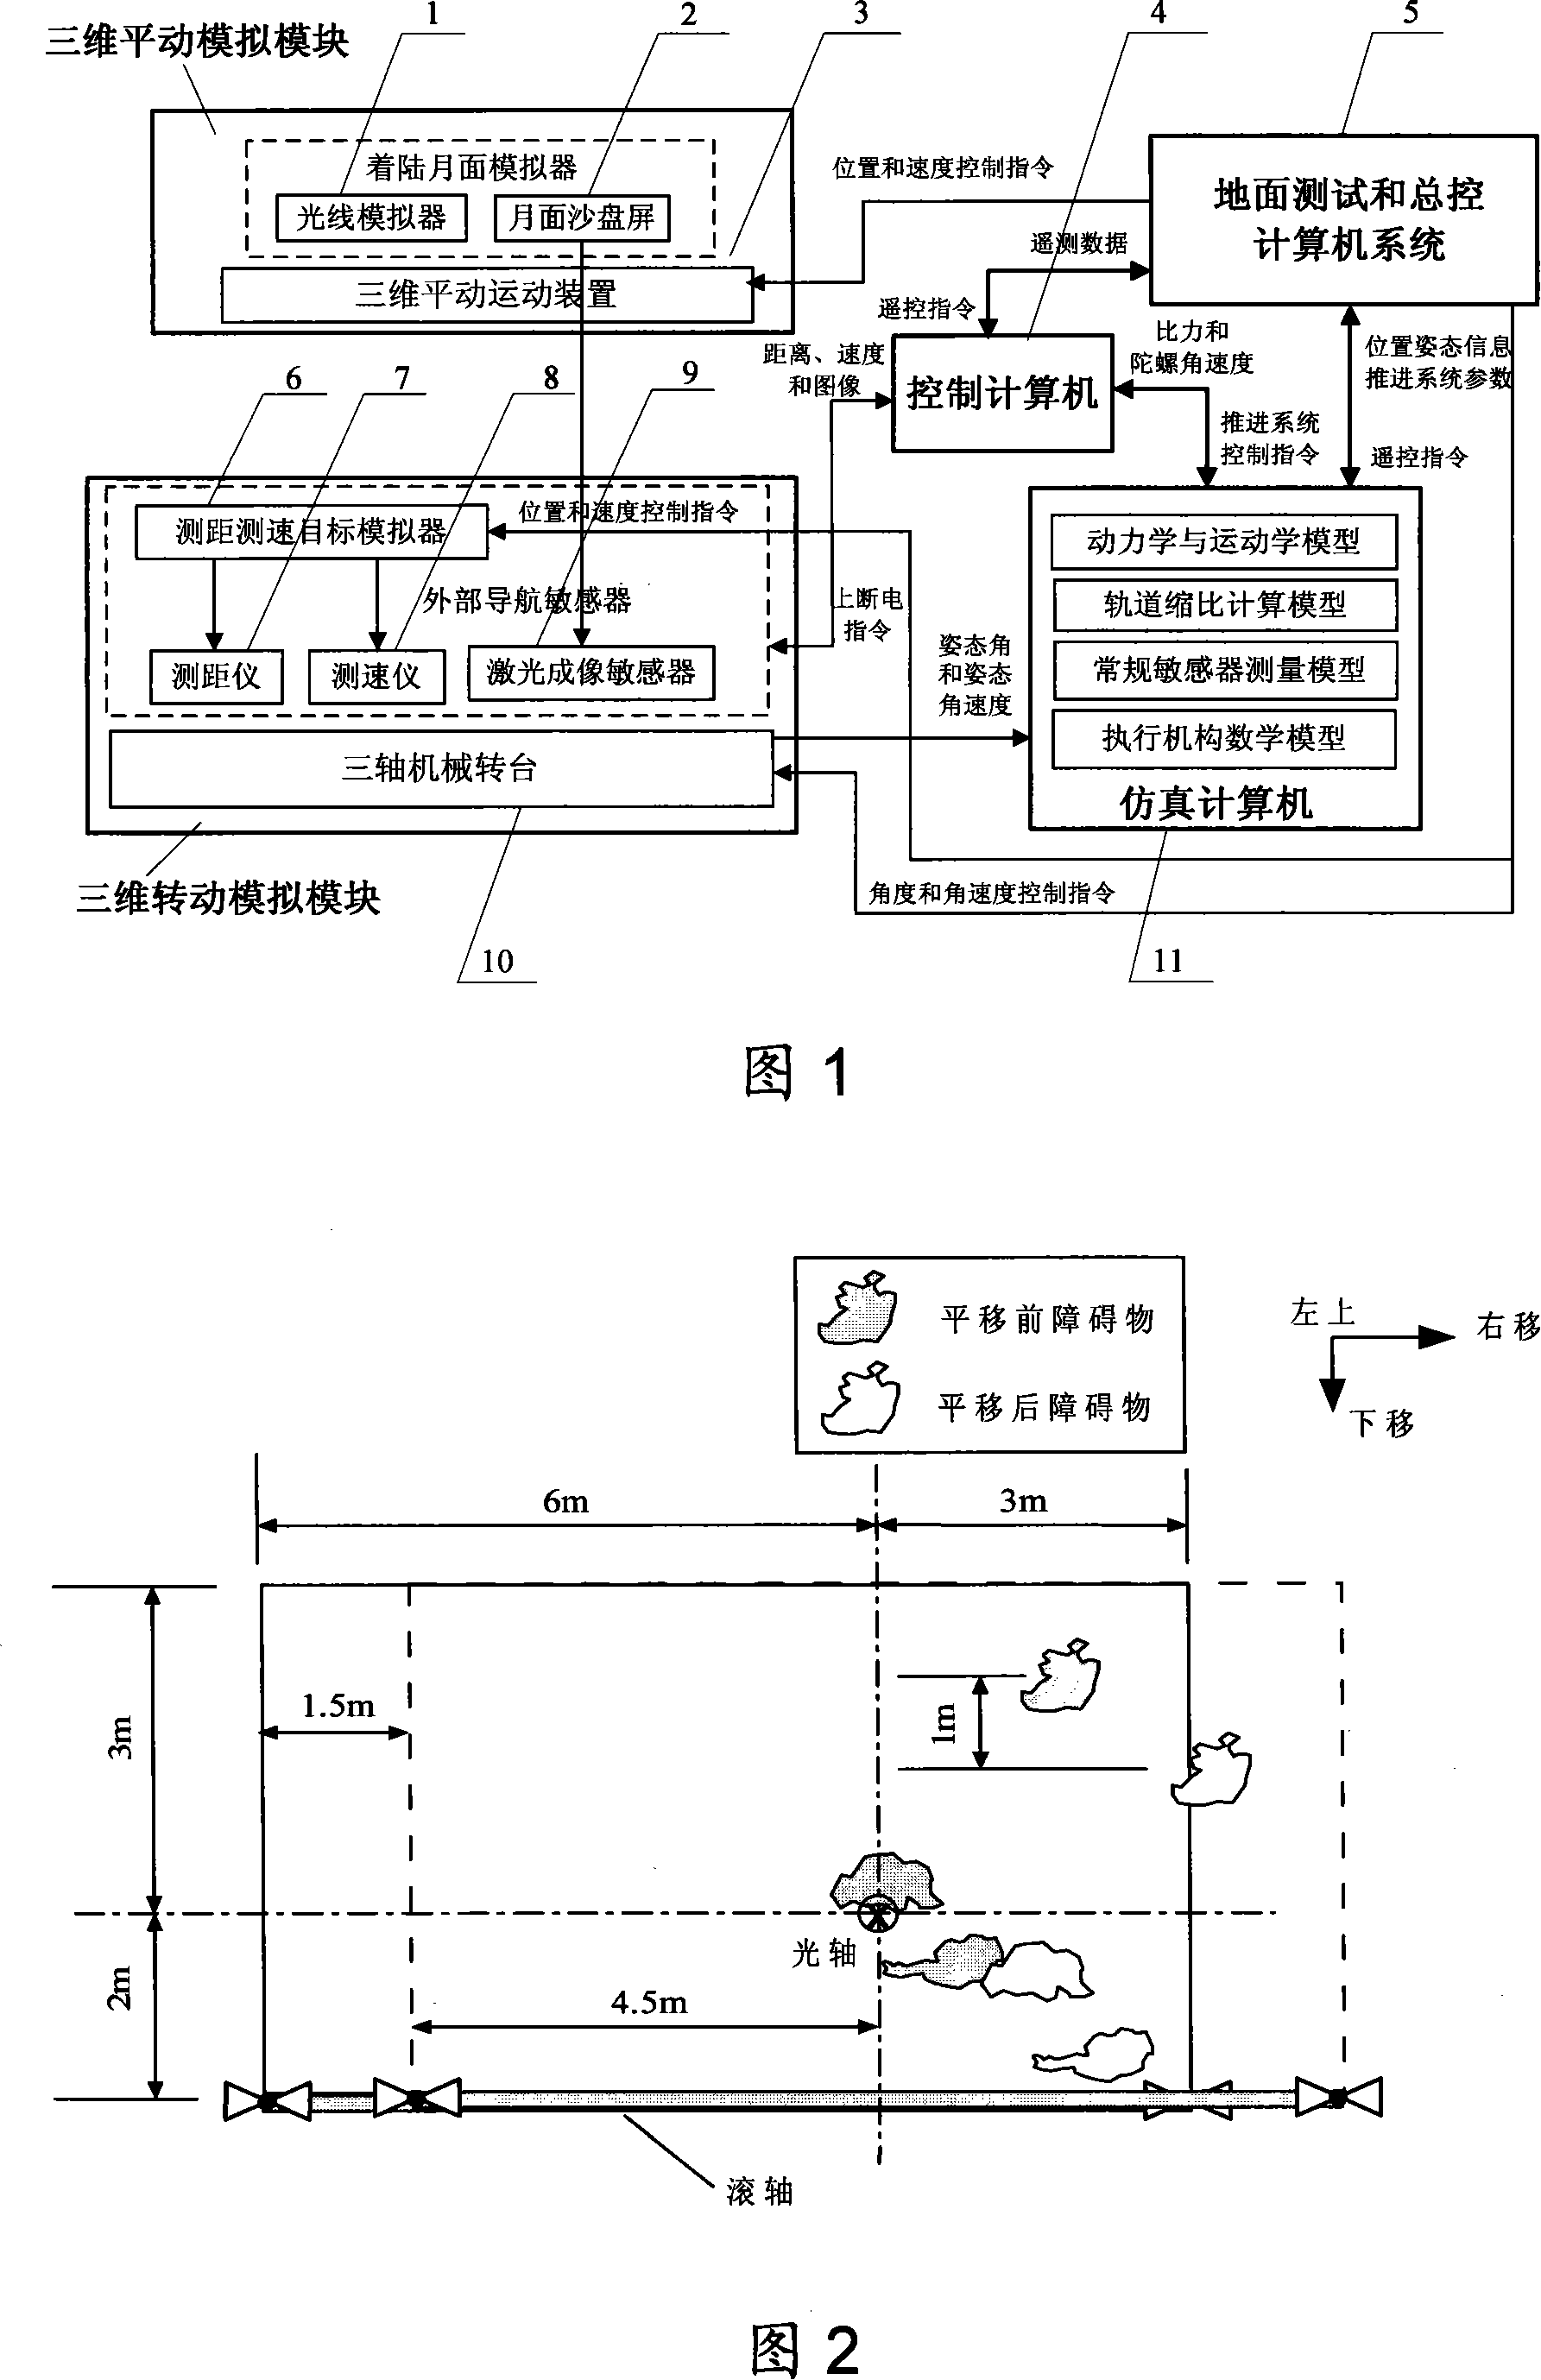 Half-physical emulation test system for controlling and guiding, navigating and controlling soft landing for moon